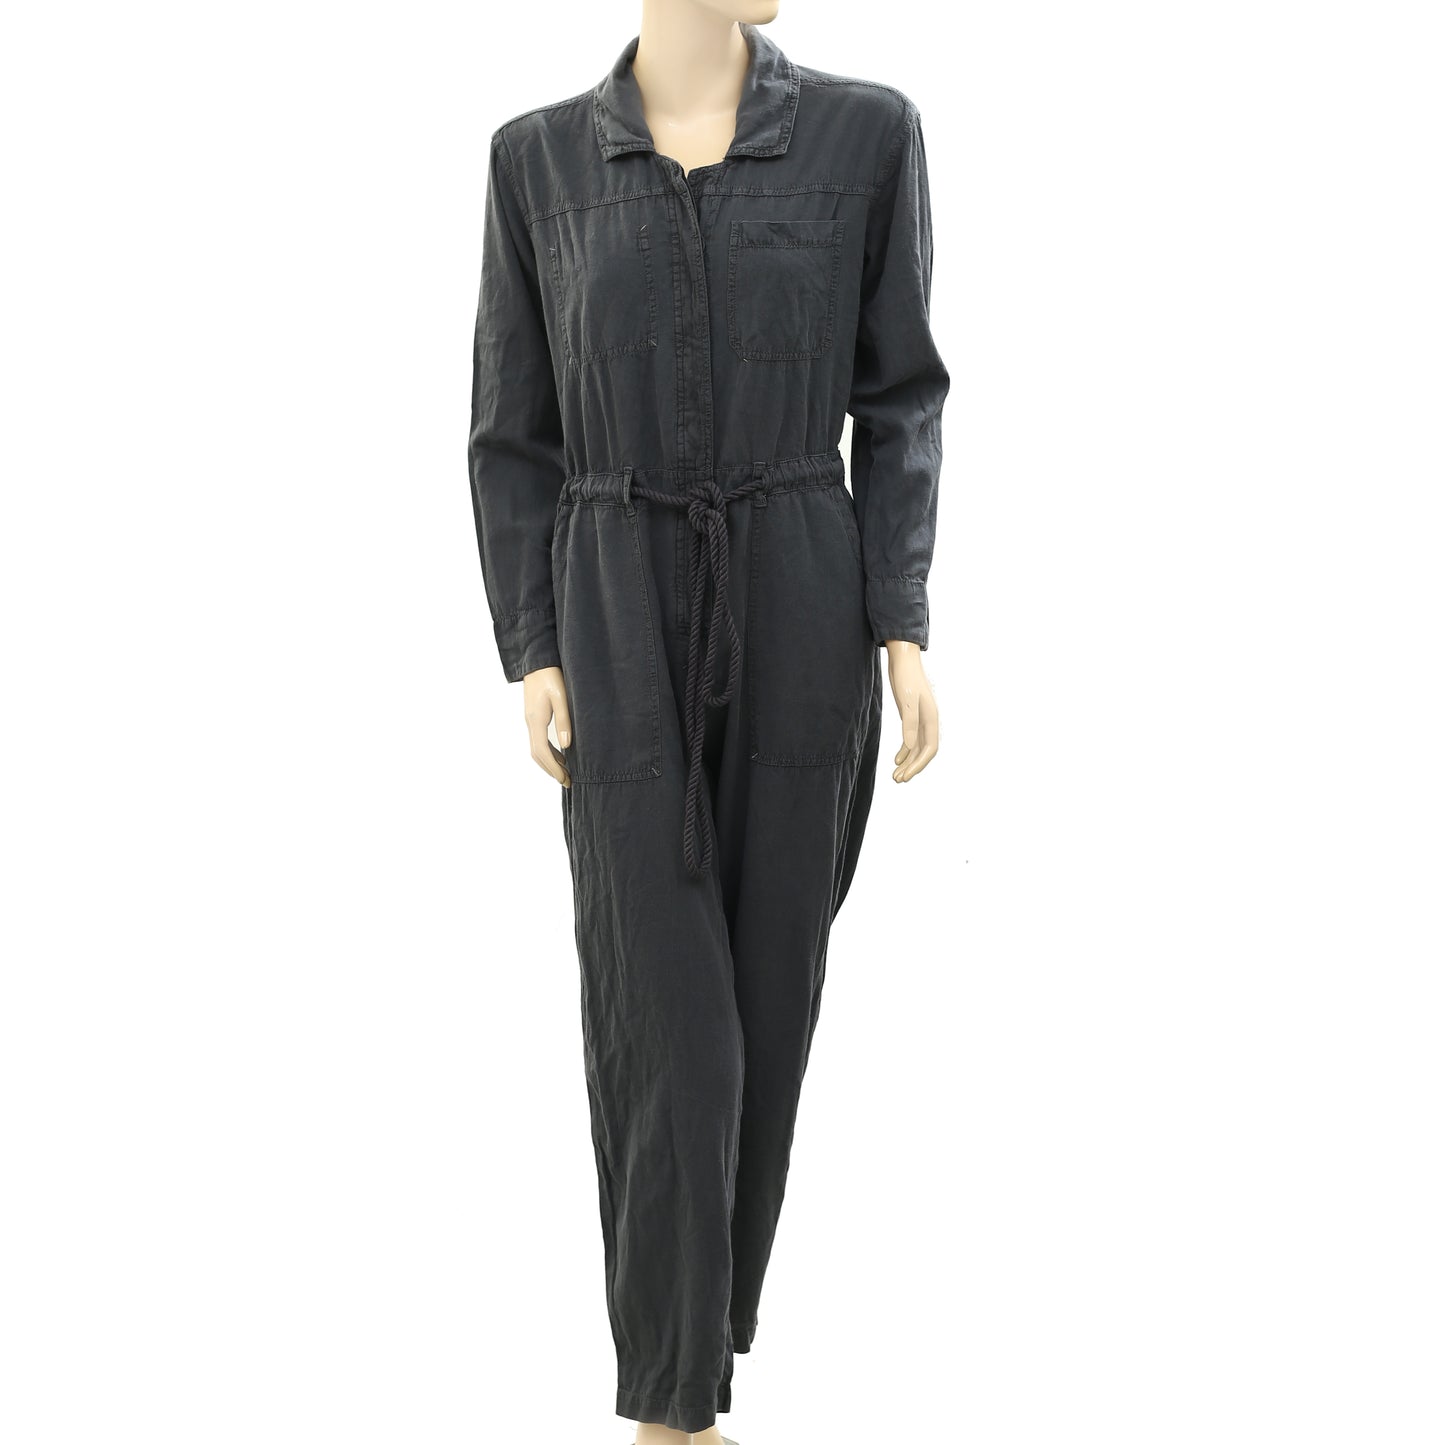 Free People Quinn Coveralls Jumpsuit Dress